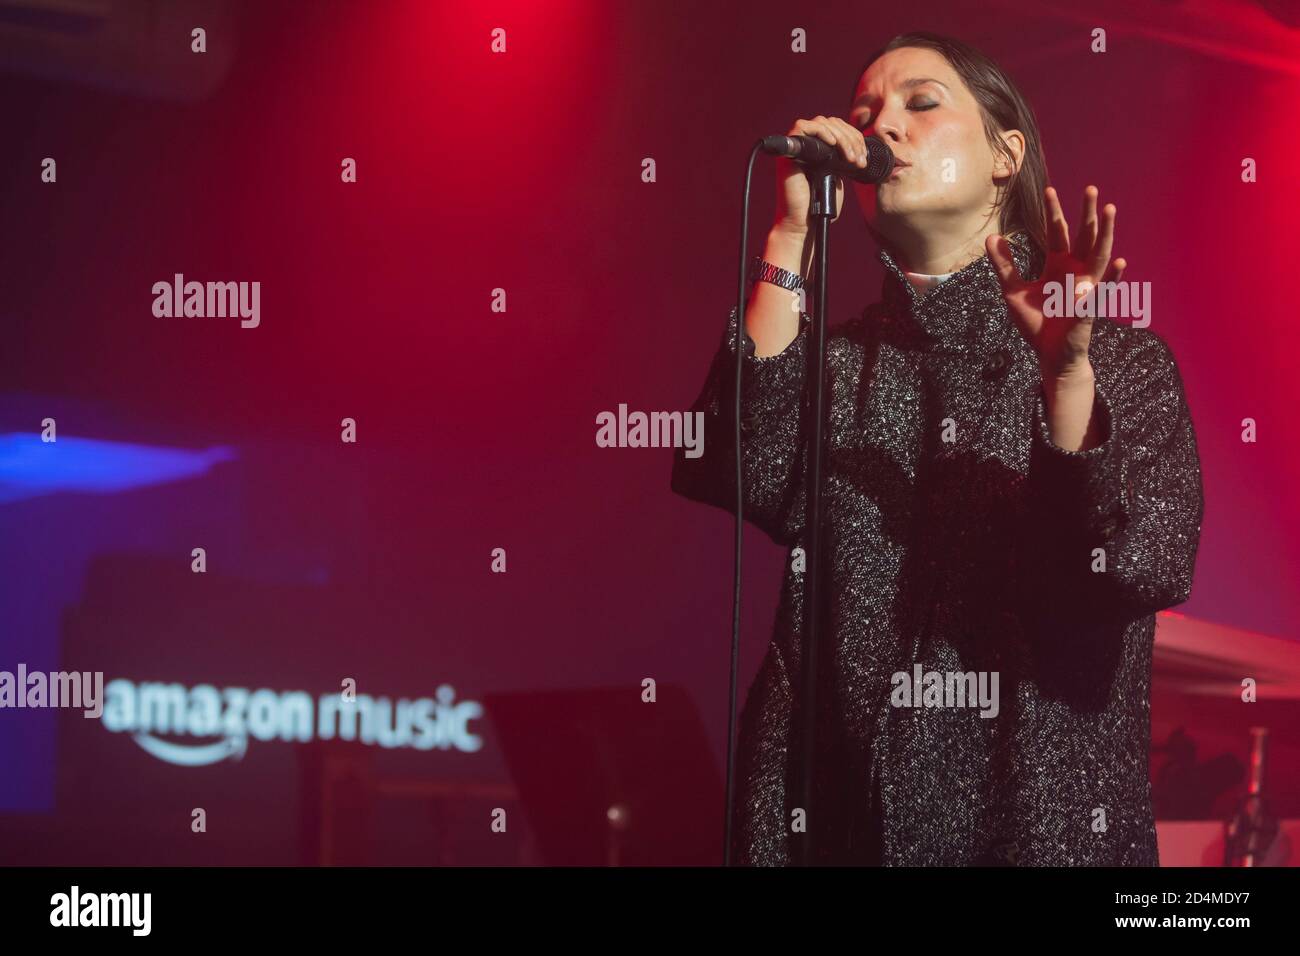 Singer Cate Le Bon performs at Clwb Ifor Bach in Cardiff for Prime Day Live - a free, livestreamed event presented by Amazon Music, in support of Music Venue Trust to raise awareness and funds for UK music venues. Stock Photo